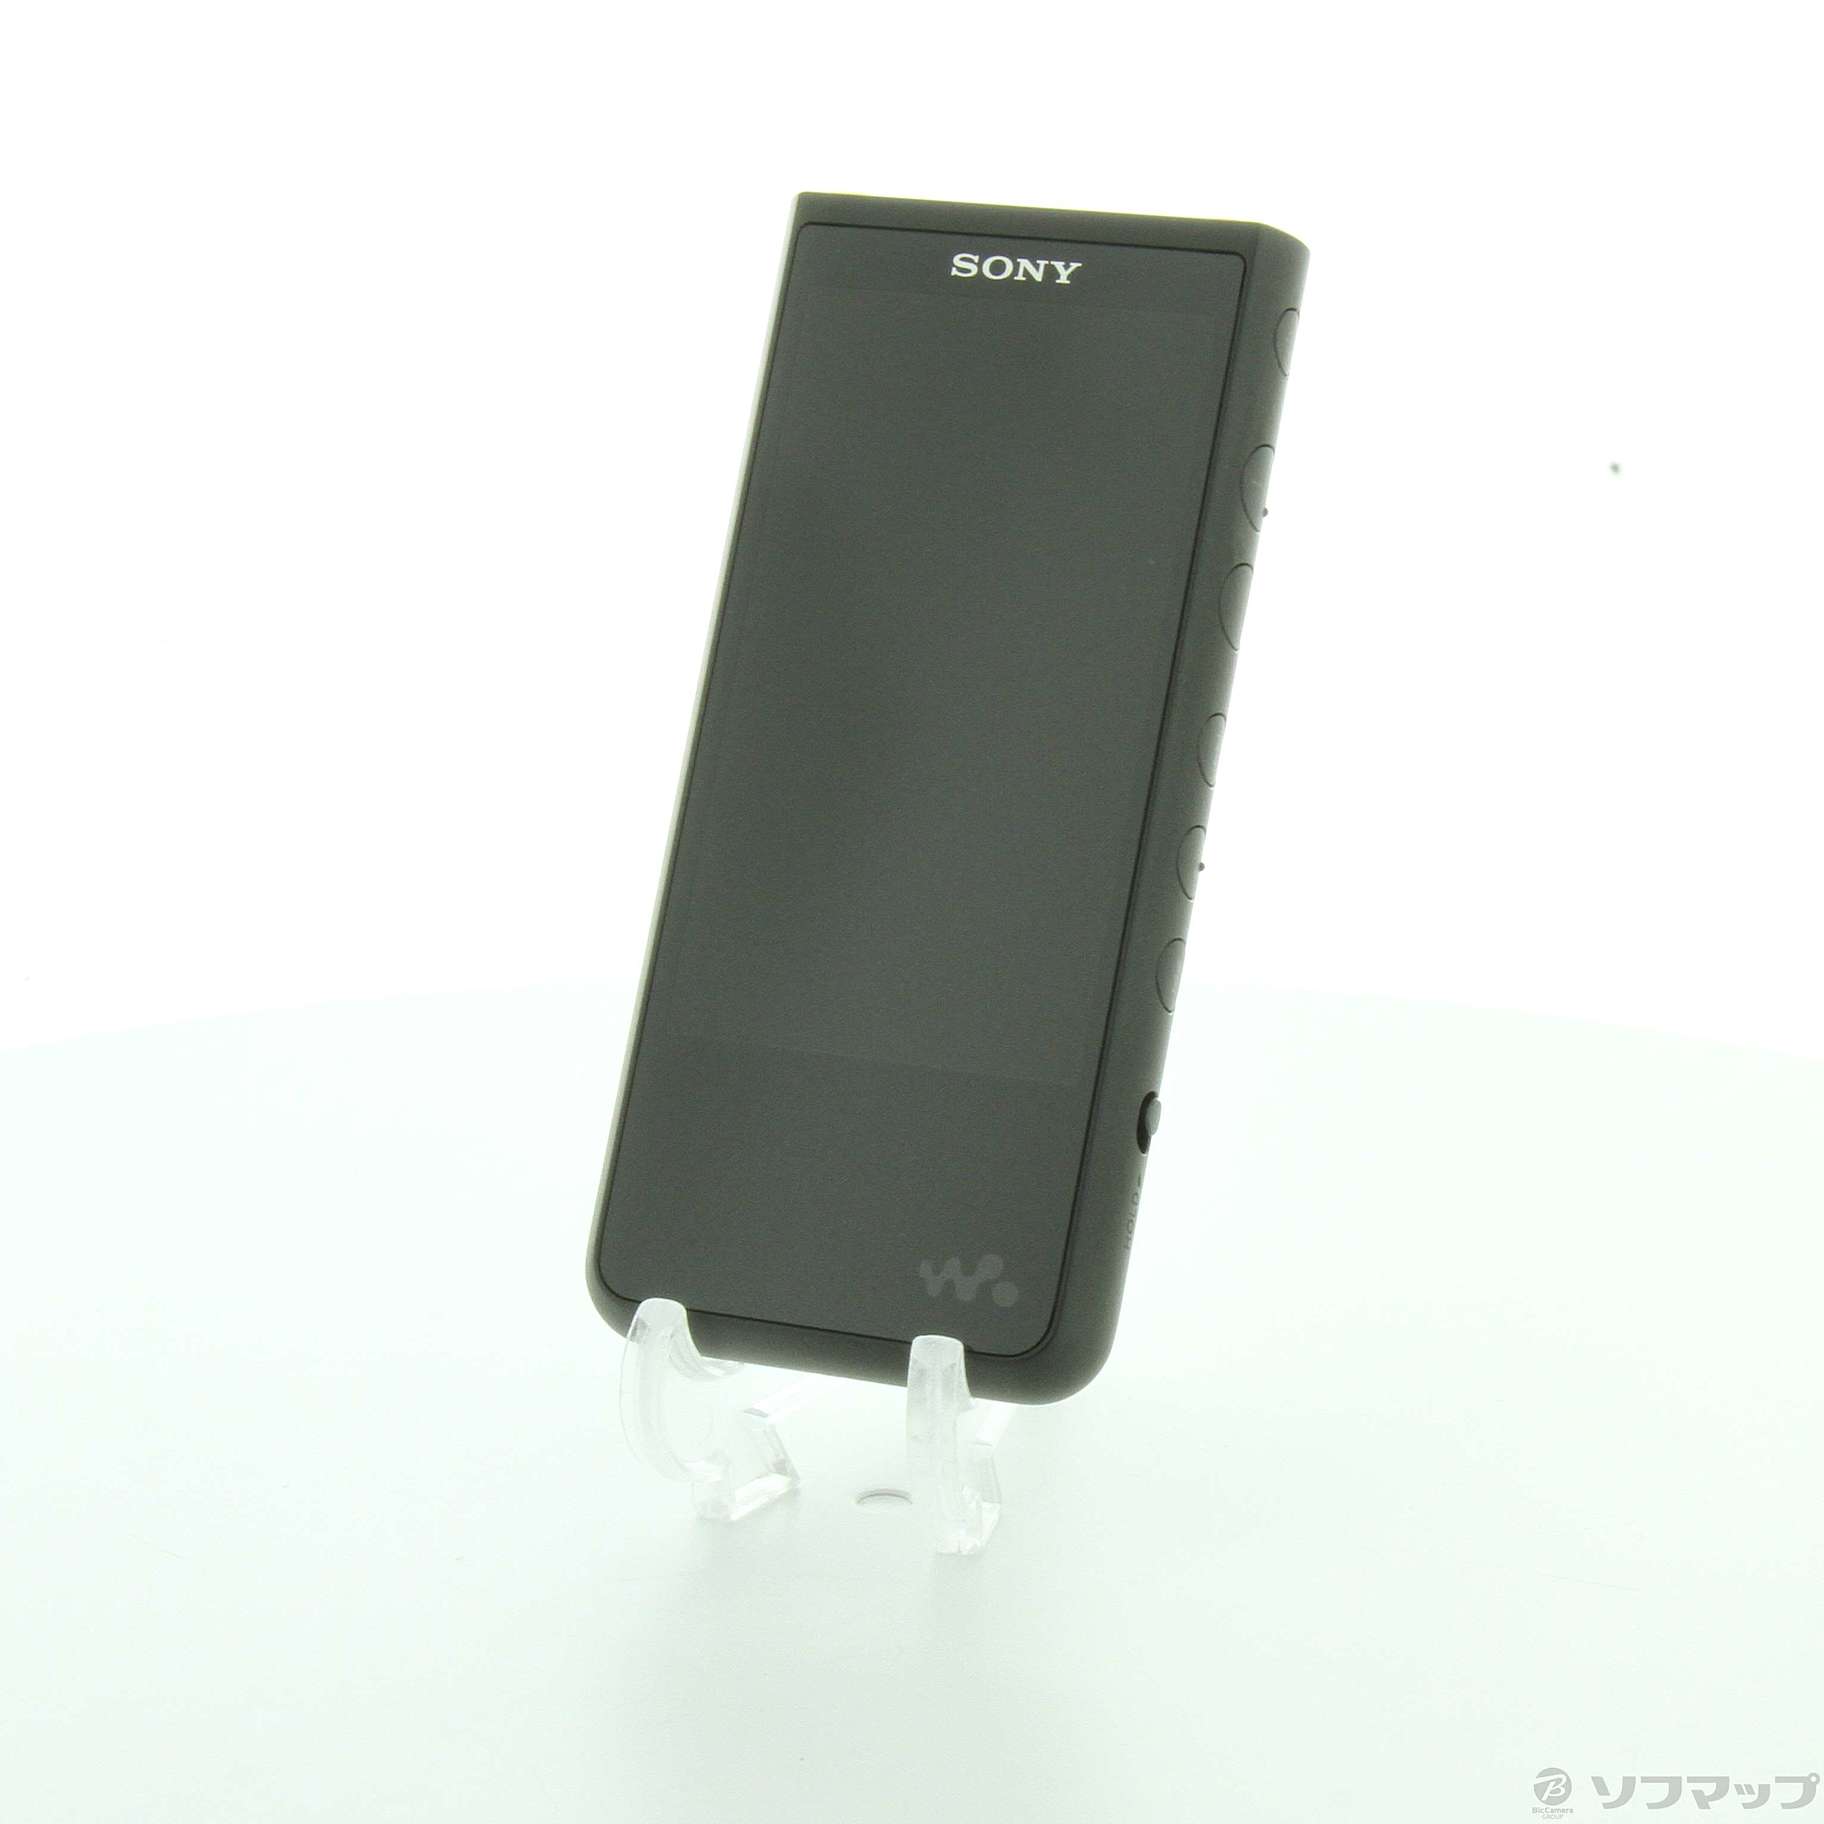 SONY ウォークマン ZX NW-ZX507(B) 64GB